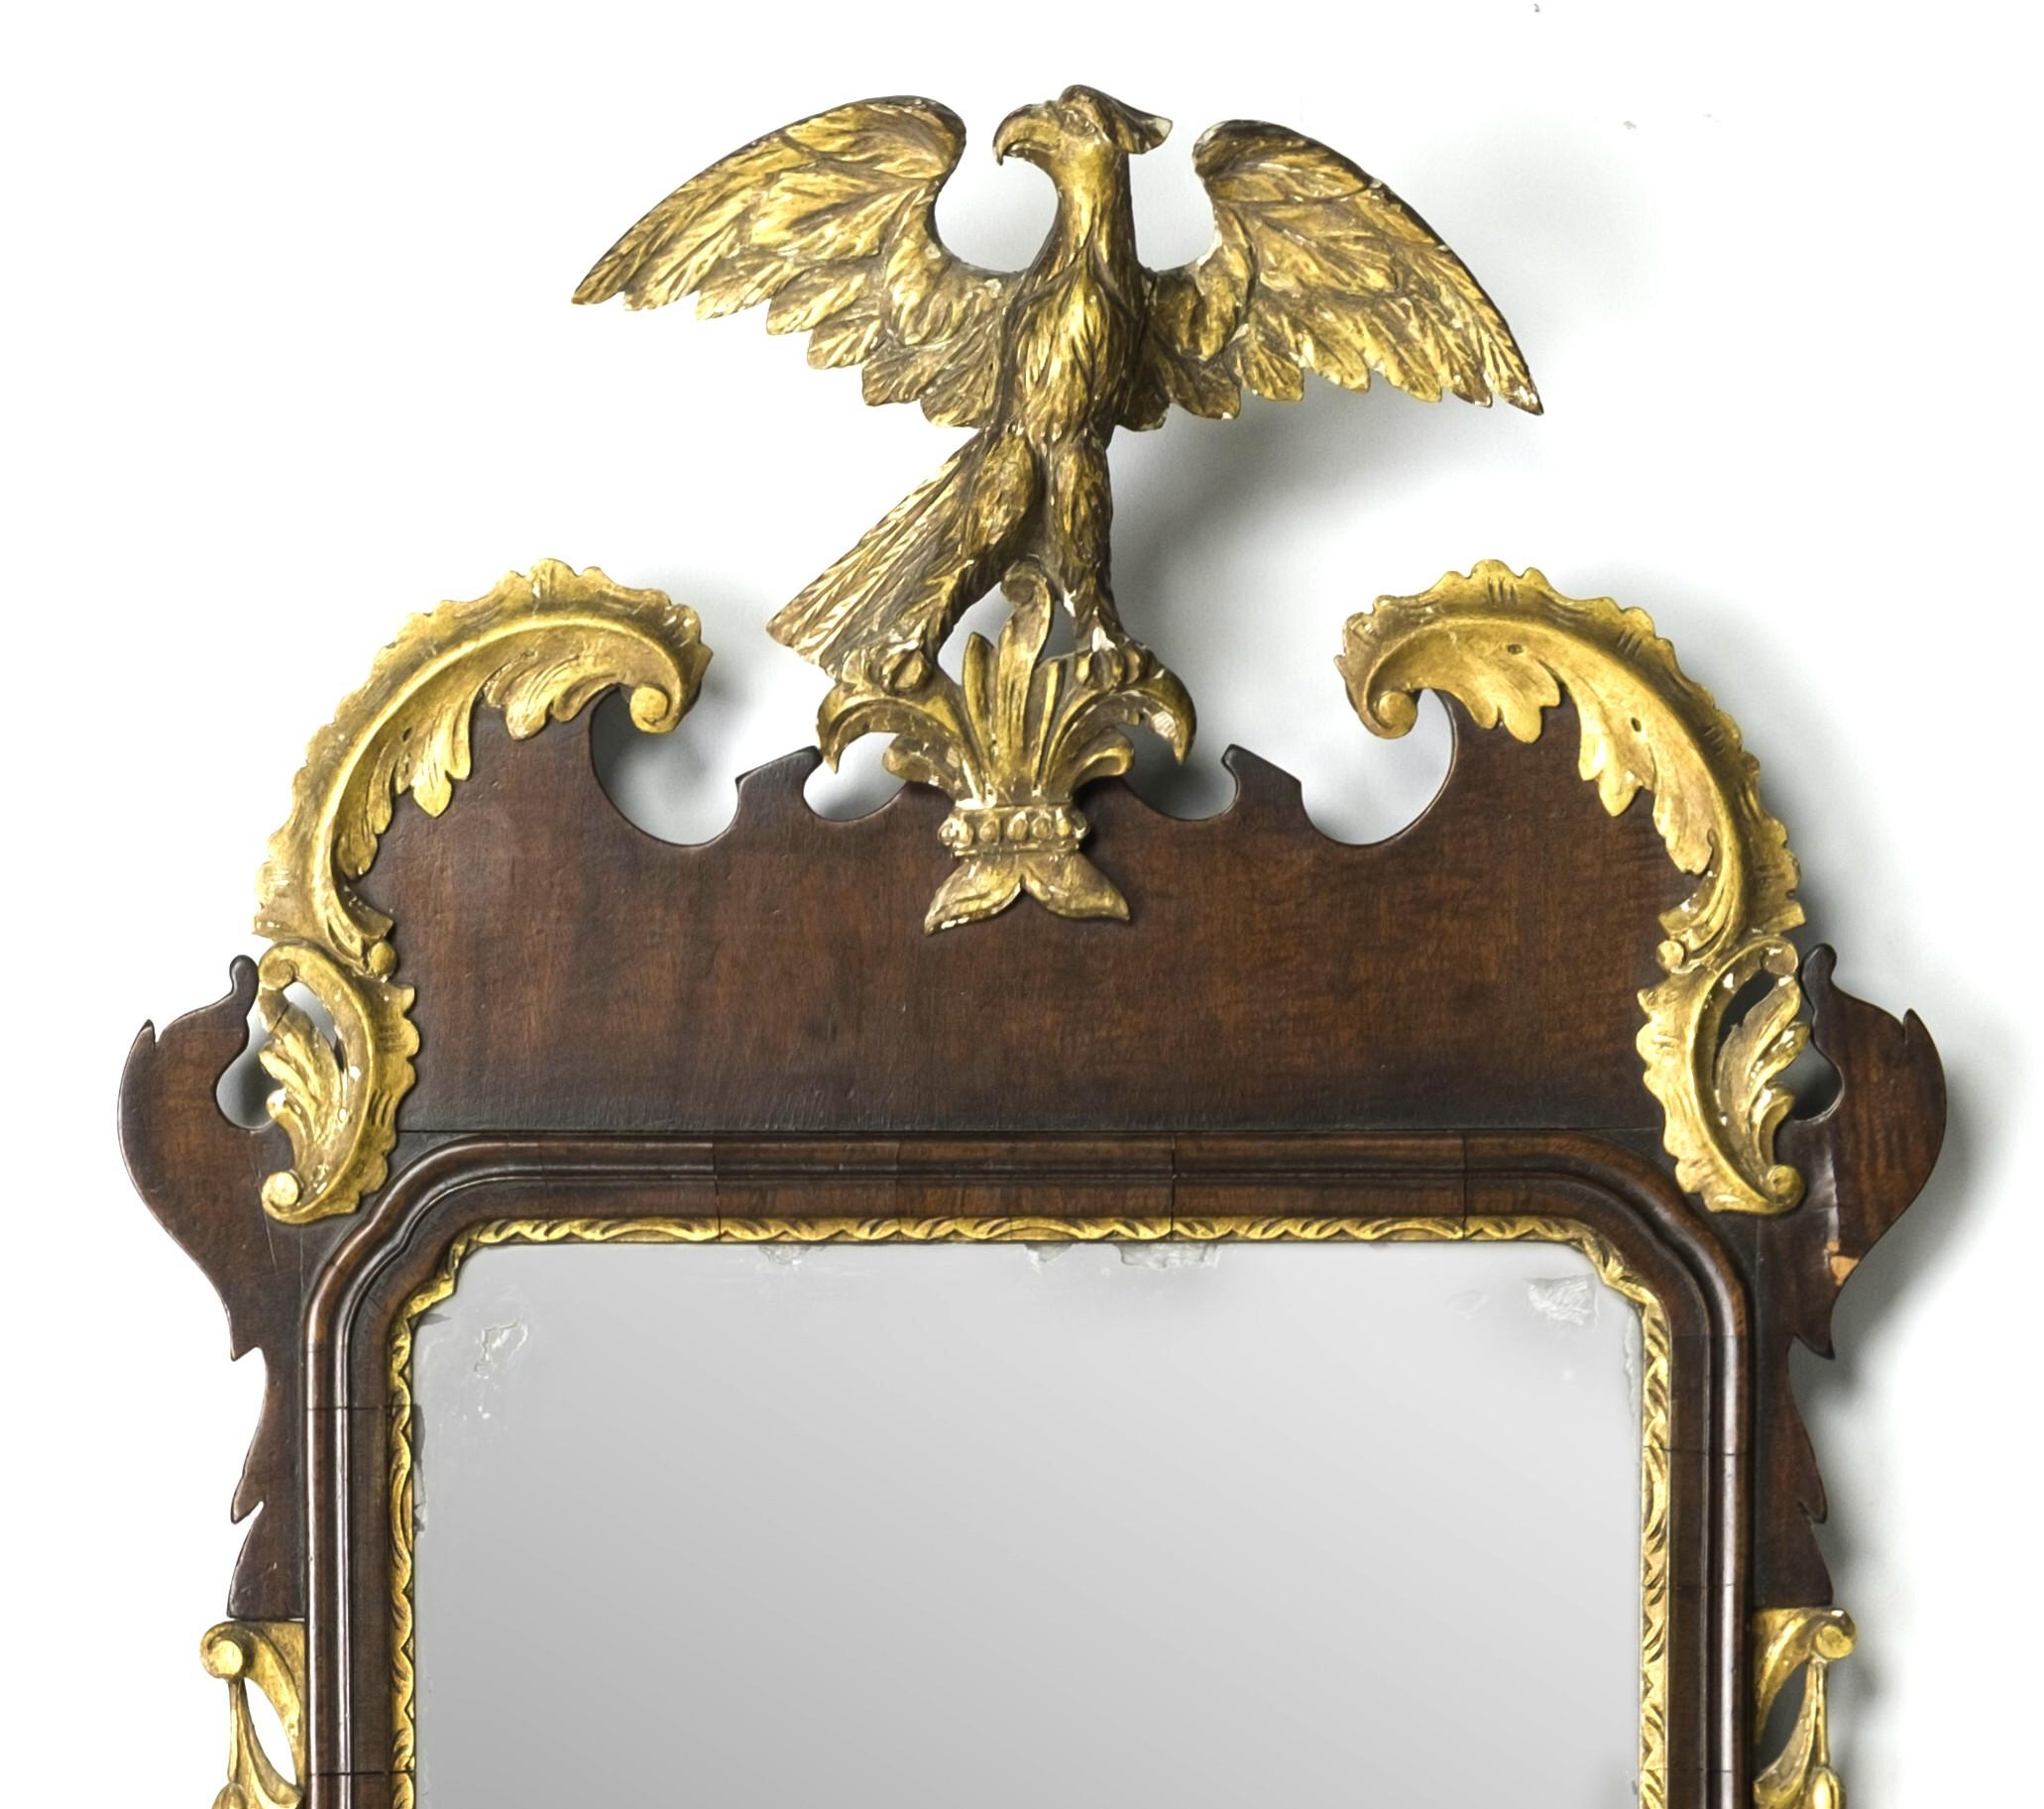 A very handsome centennial Constitutional, Chippendale style looking glass / pier mirror showing an old if not original rectangular plate set within solid mahogany moldings on a mahogany veneered frame, the pediment showing a hand carved & gilded